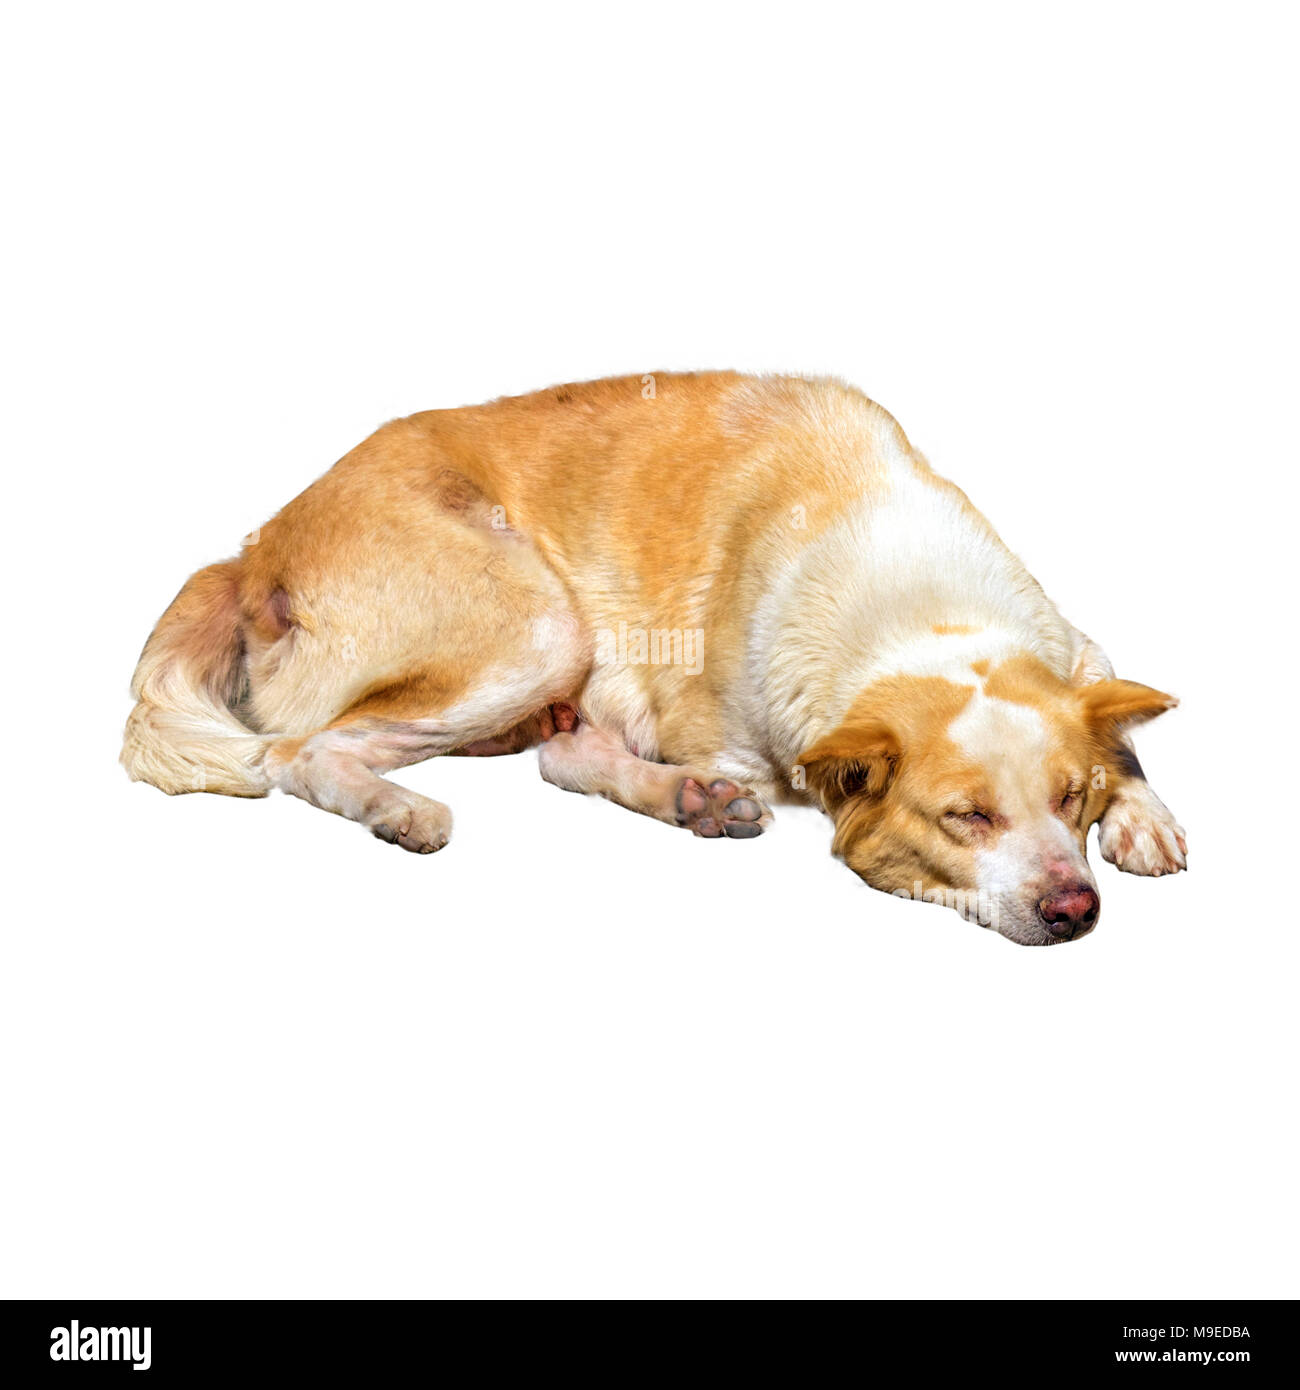 Dogs are sleeping comfortably isolate on white background Stock Photo